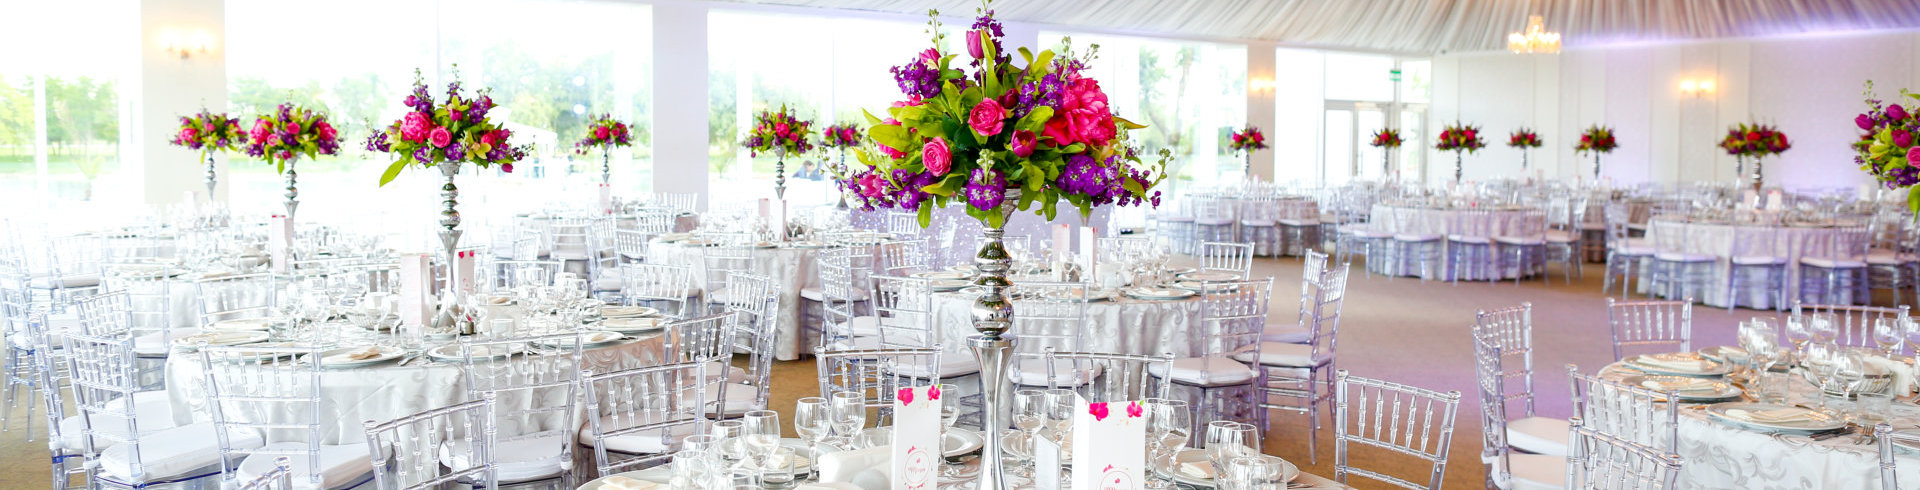 wedding reception hall decorated with beautiful floral centerpieces and clear ghost chairs